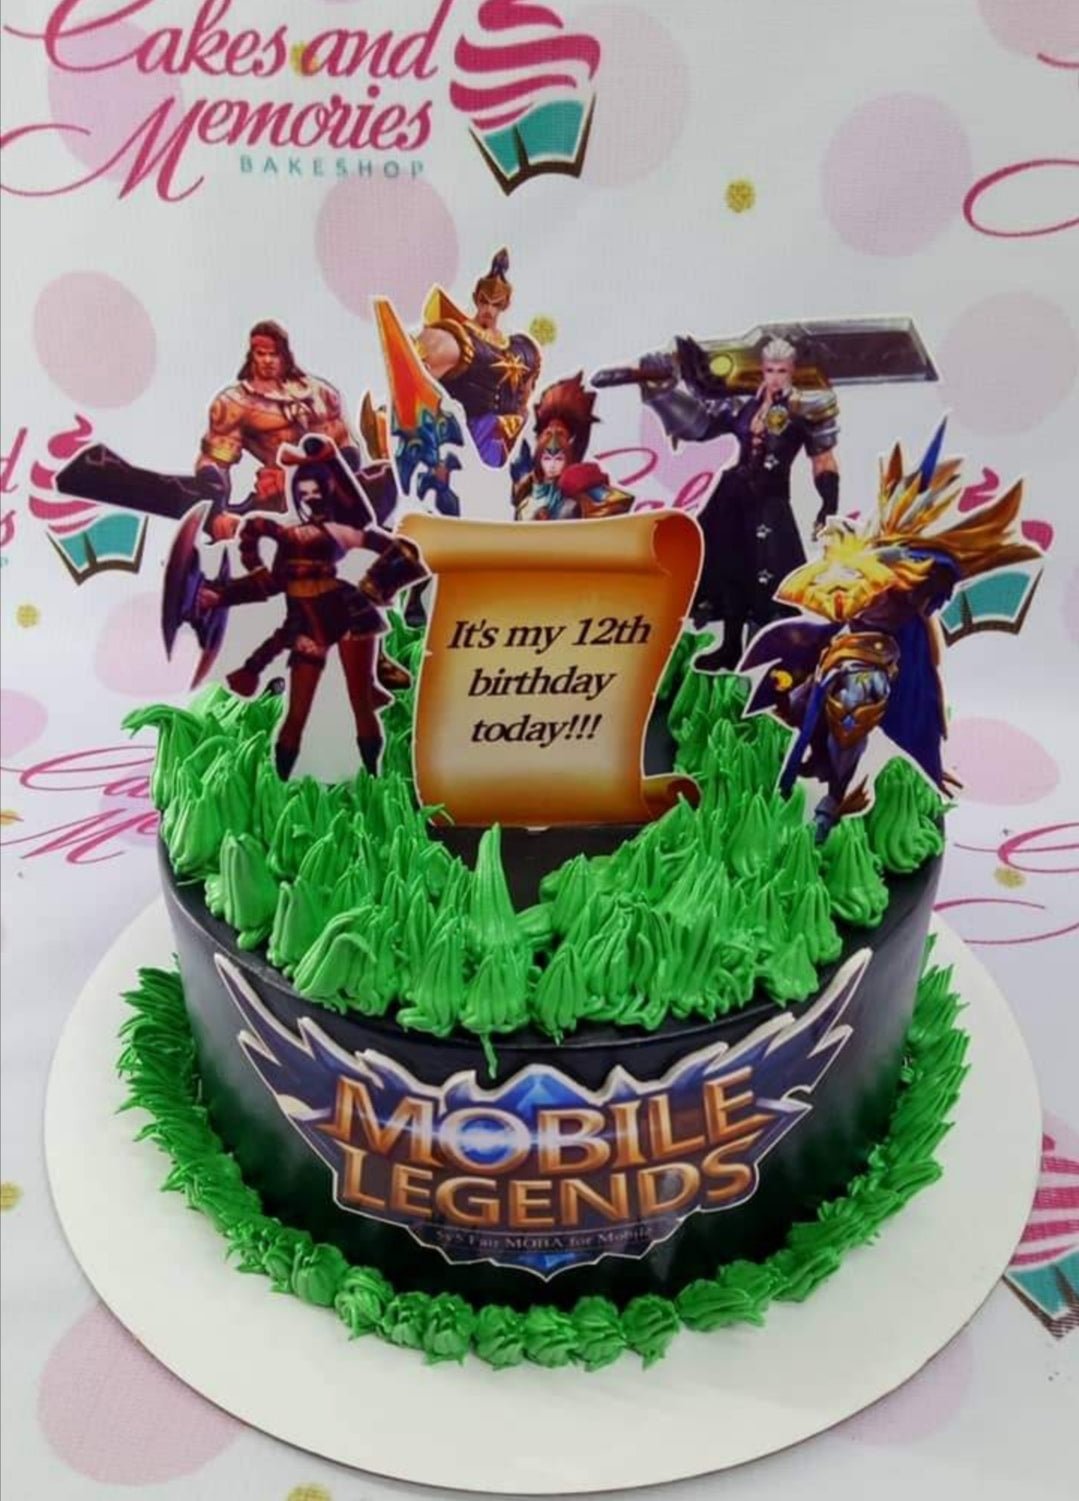 Mobile Legends Cake - 6402 – Cakes and Memories Bakeshop